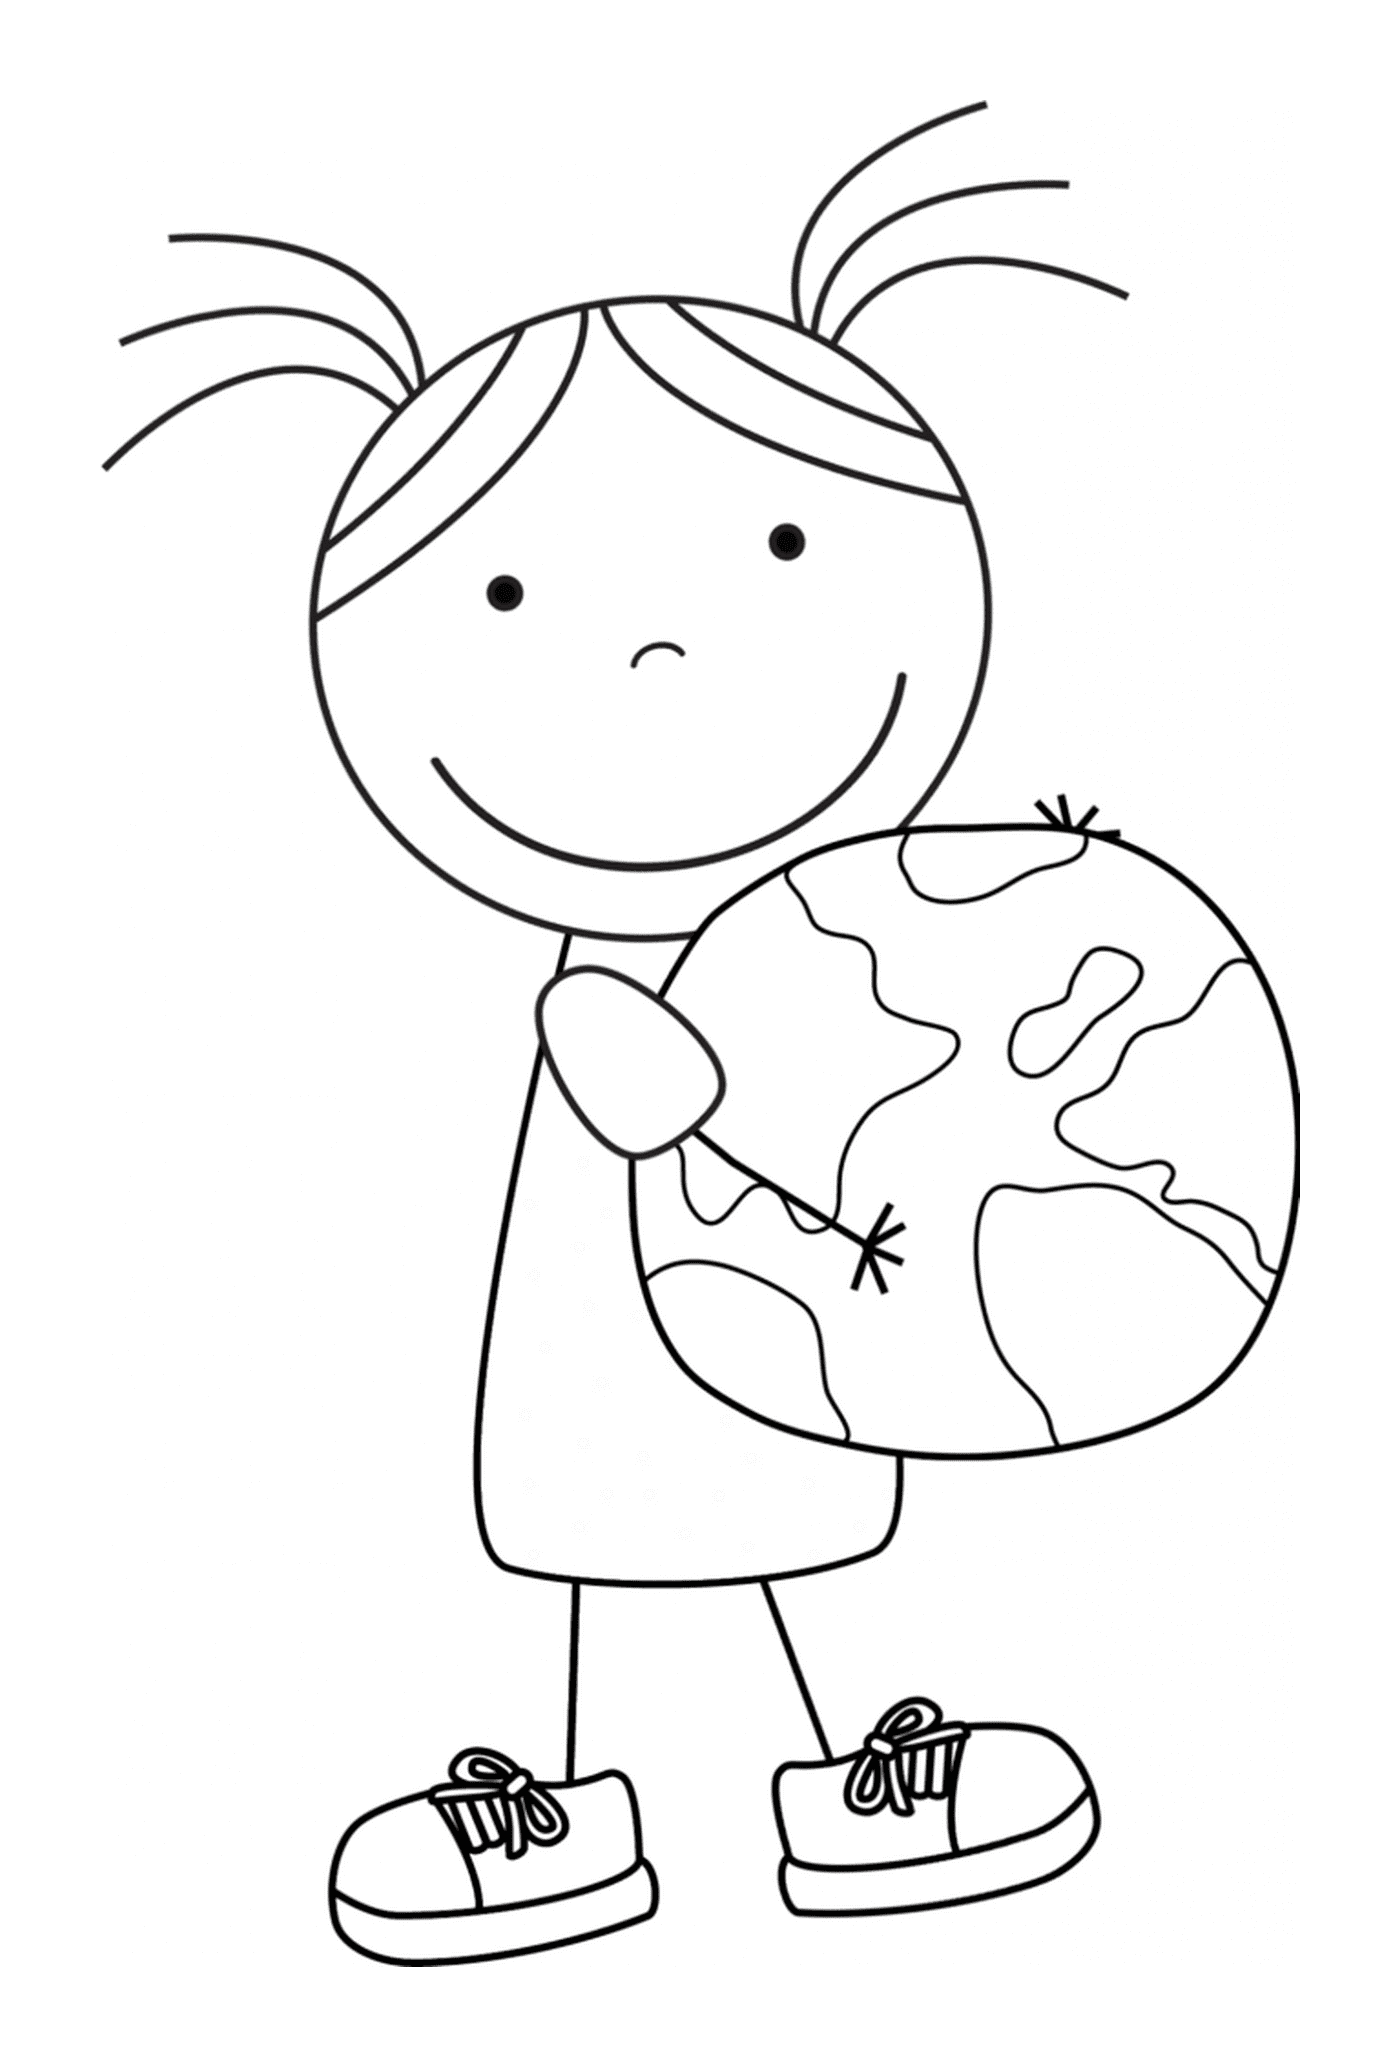  Little girl holds the Earth, an ecological symbol 